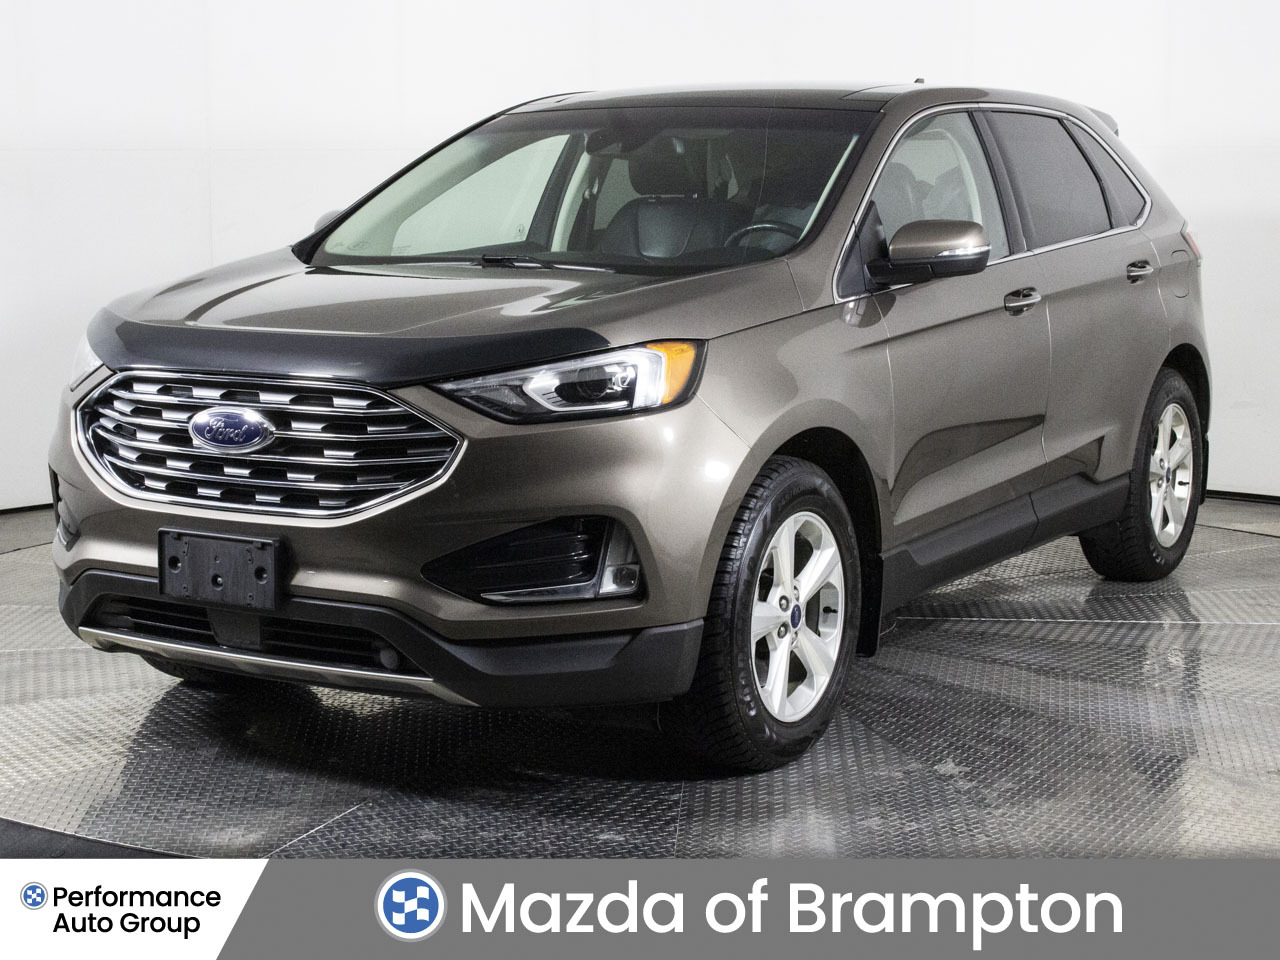 2019 Ford Edge TITANIUM AWD PANO ROOF LEATHER WINTER TIRES INCL!